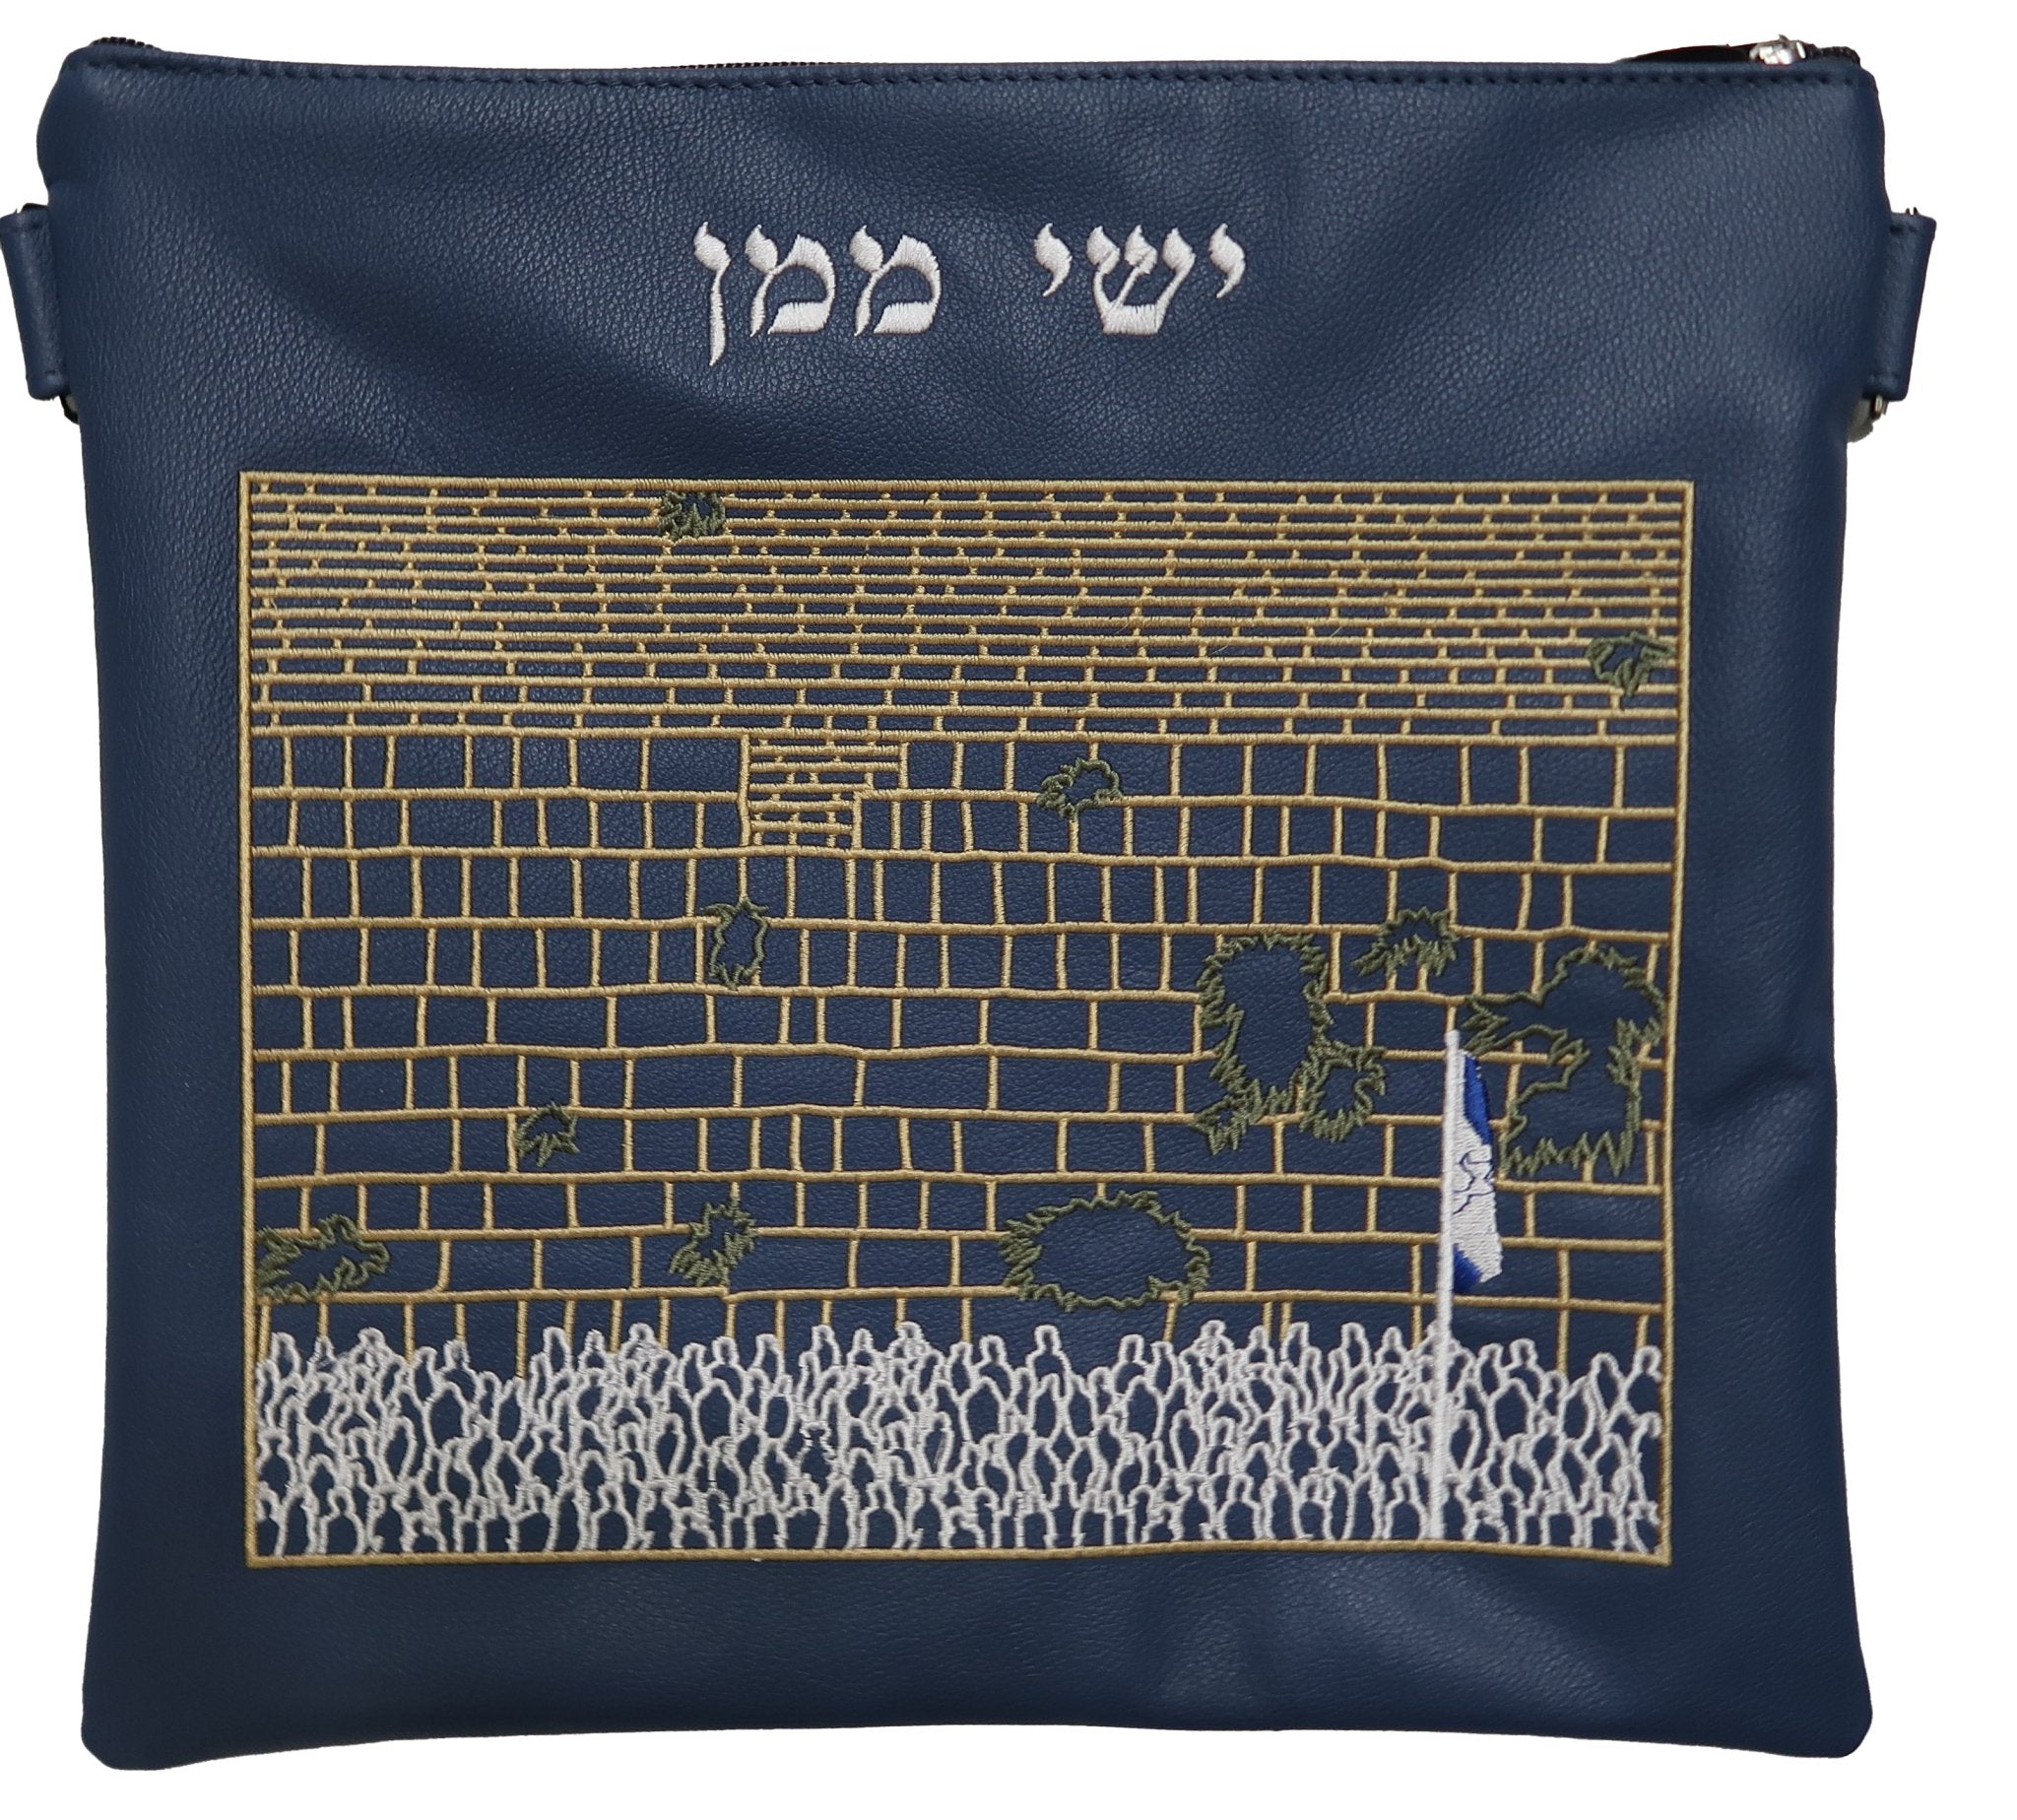 Amazing artwork of the kosel - kotel - Simcha Couture